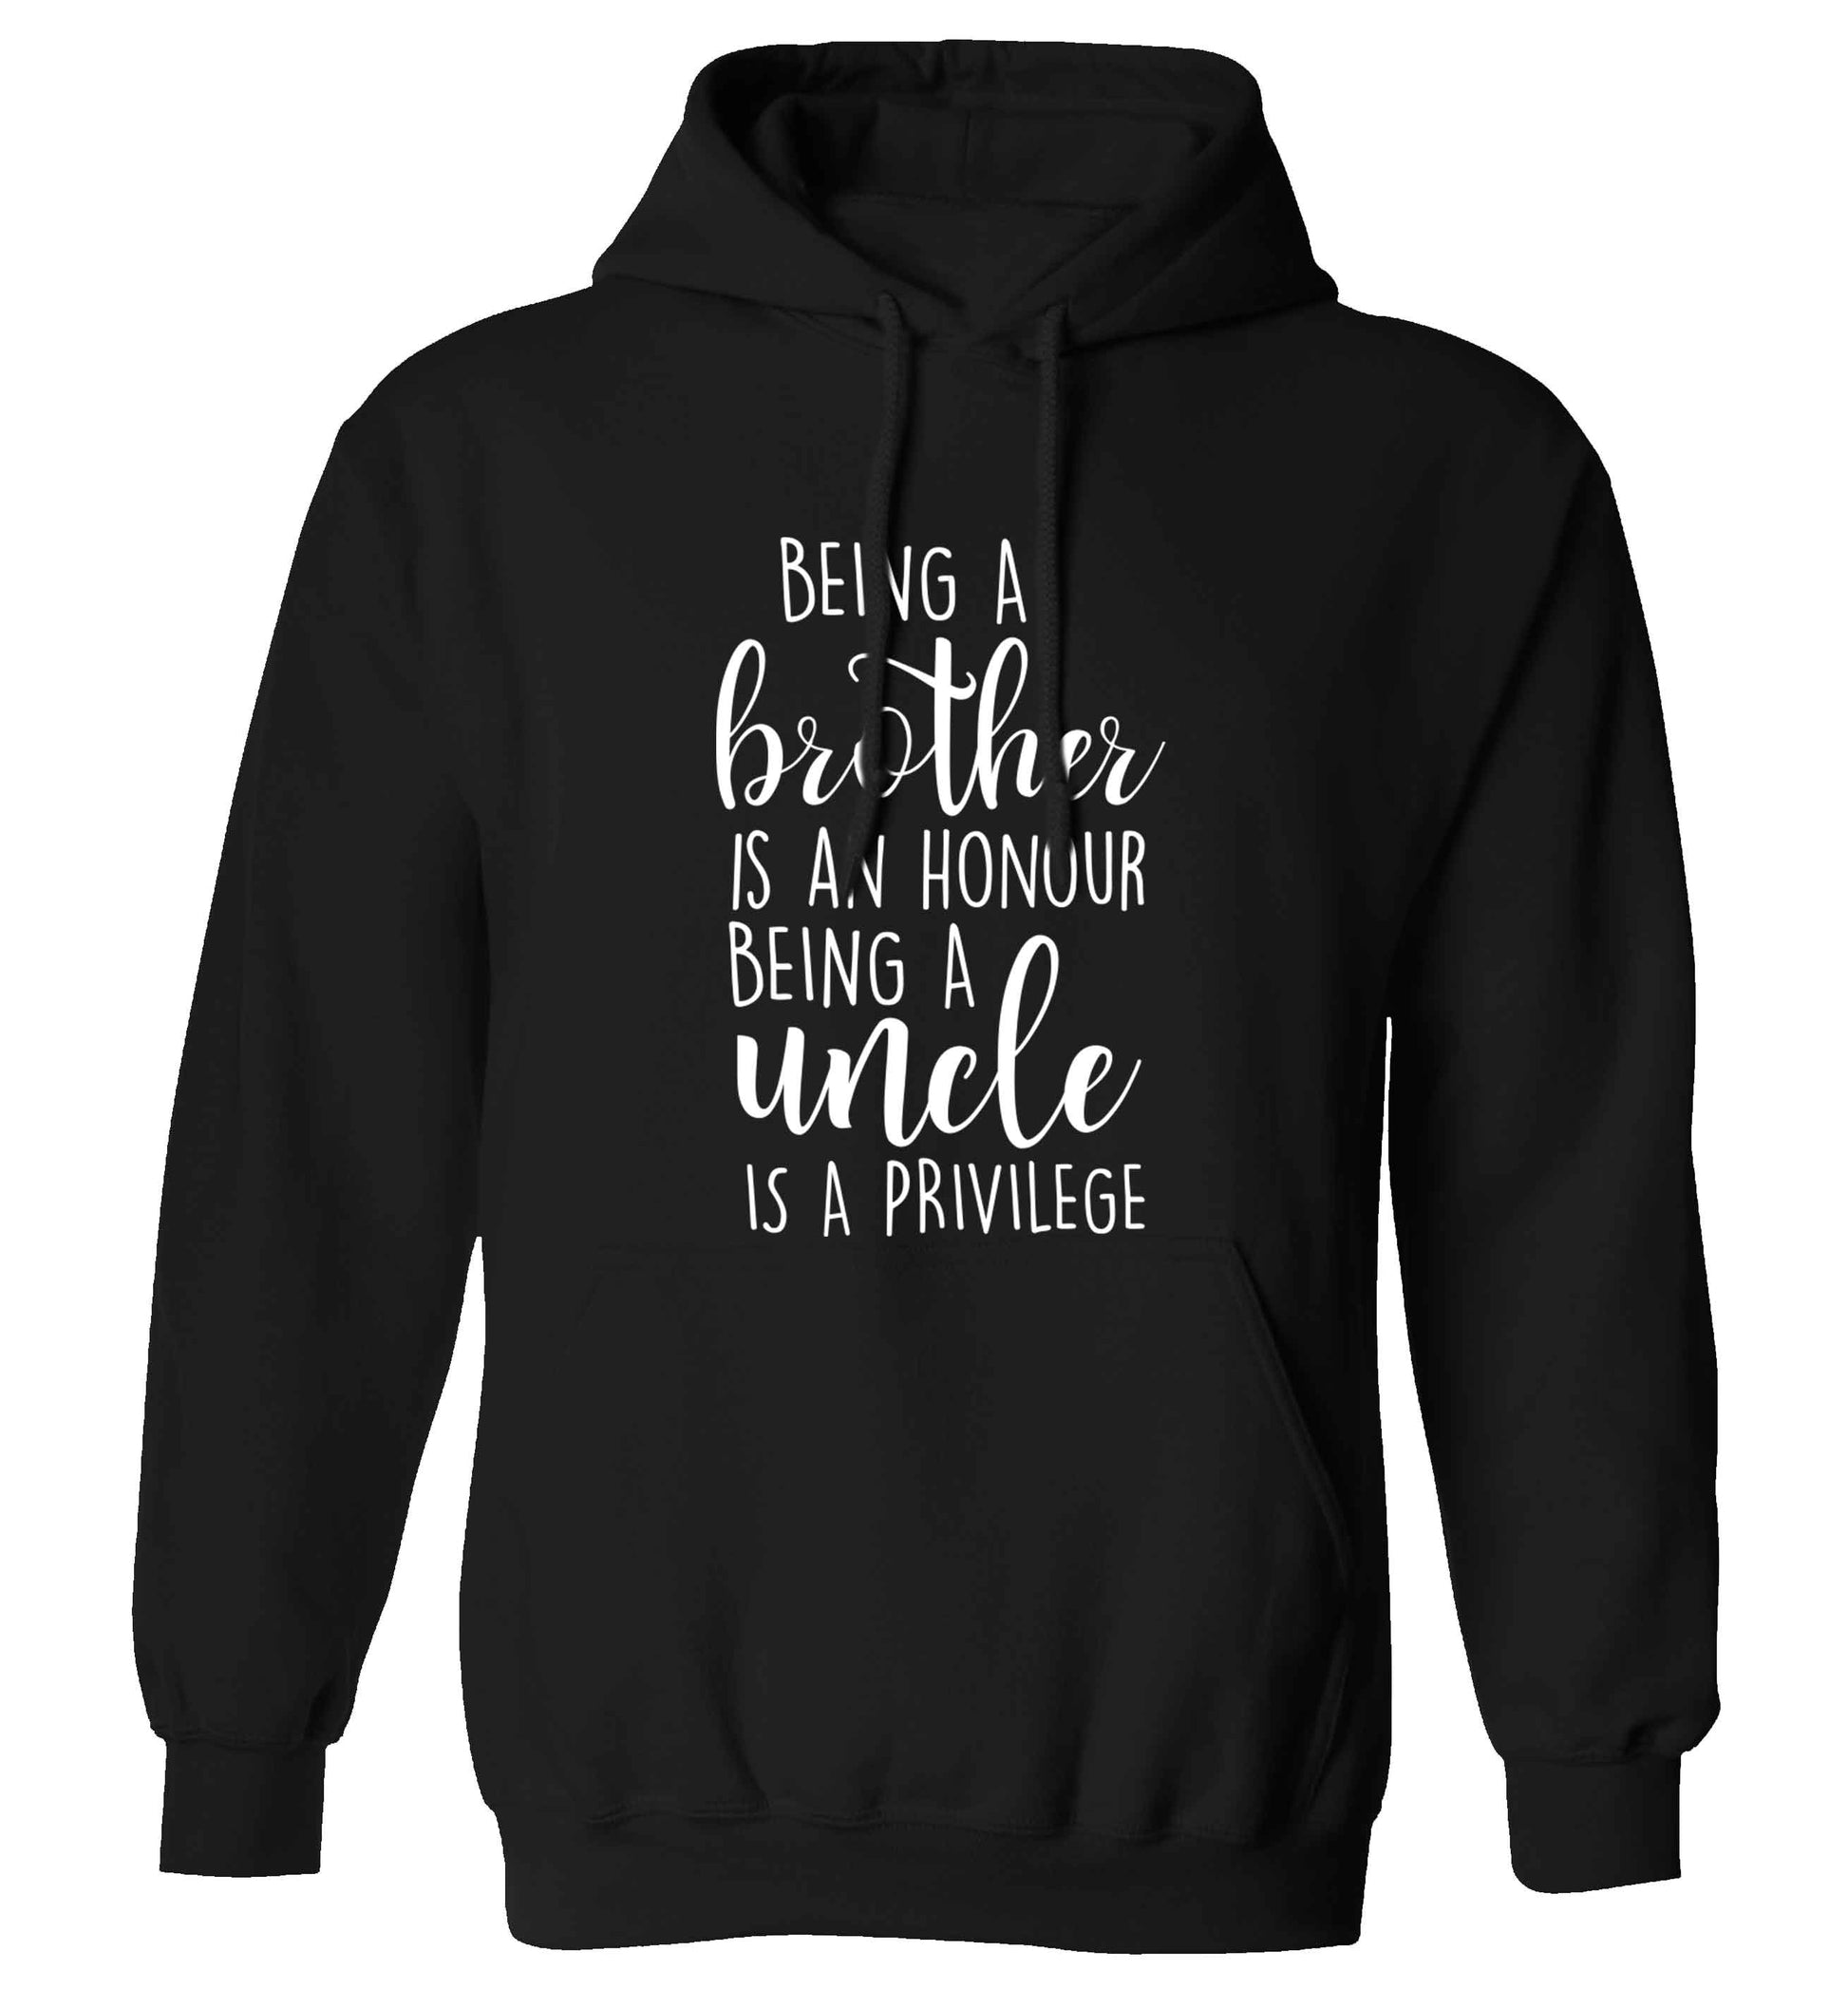 Being a brother is an honour being an uncle is a privilege adults unisex black hoodie 2XL